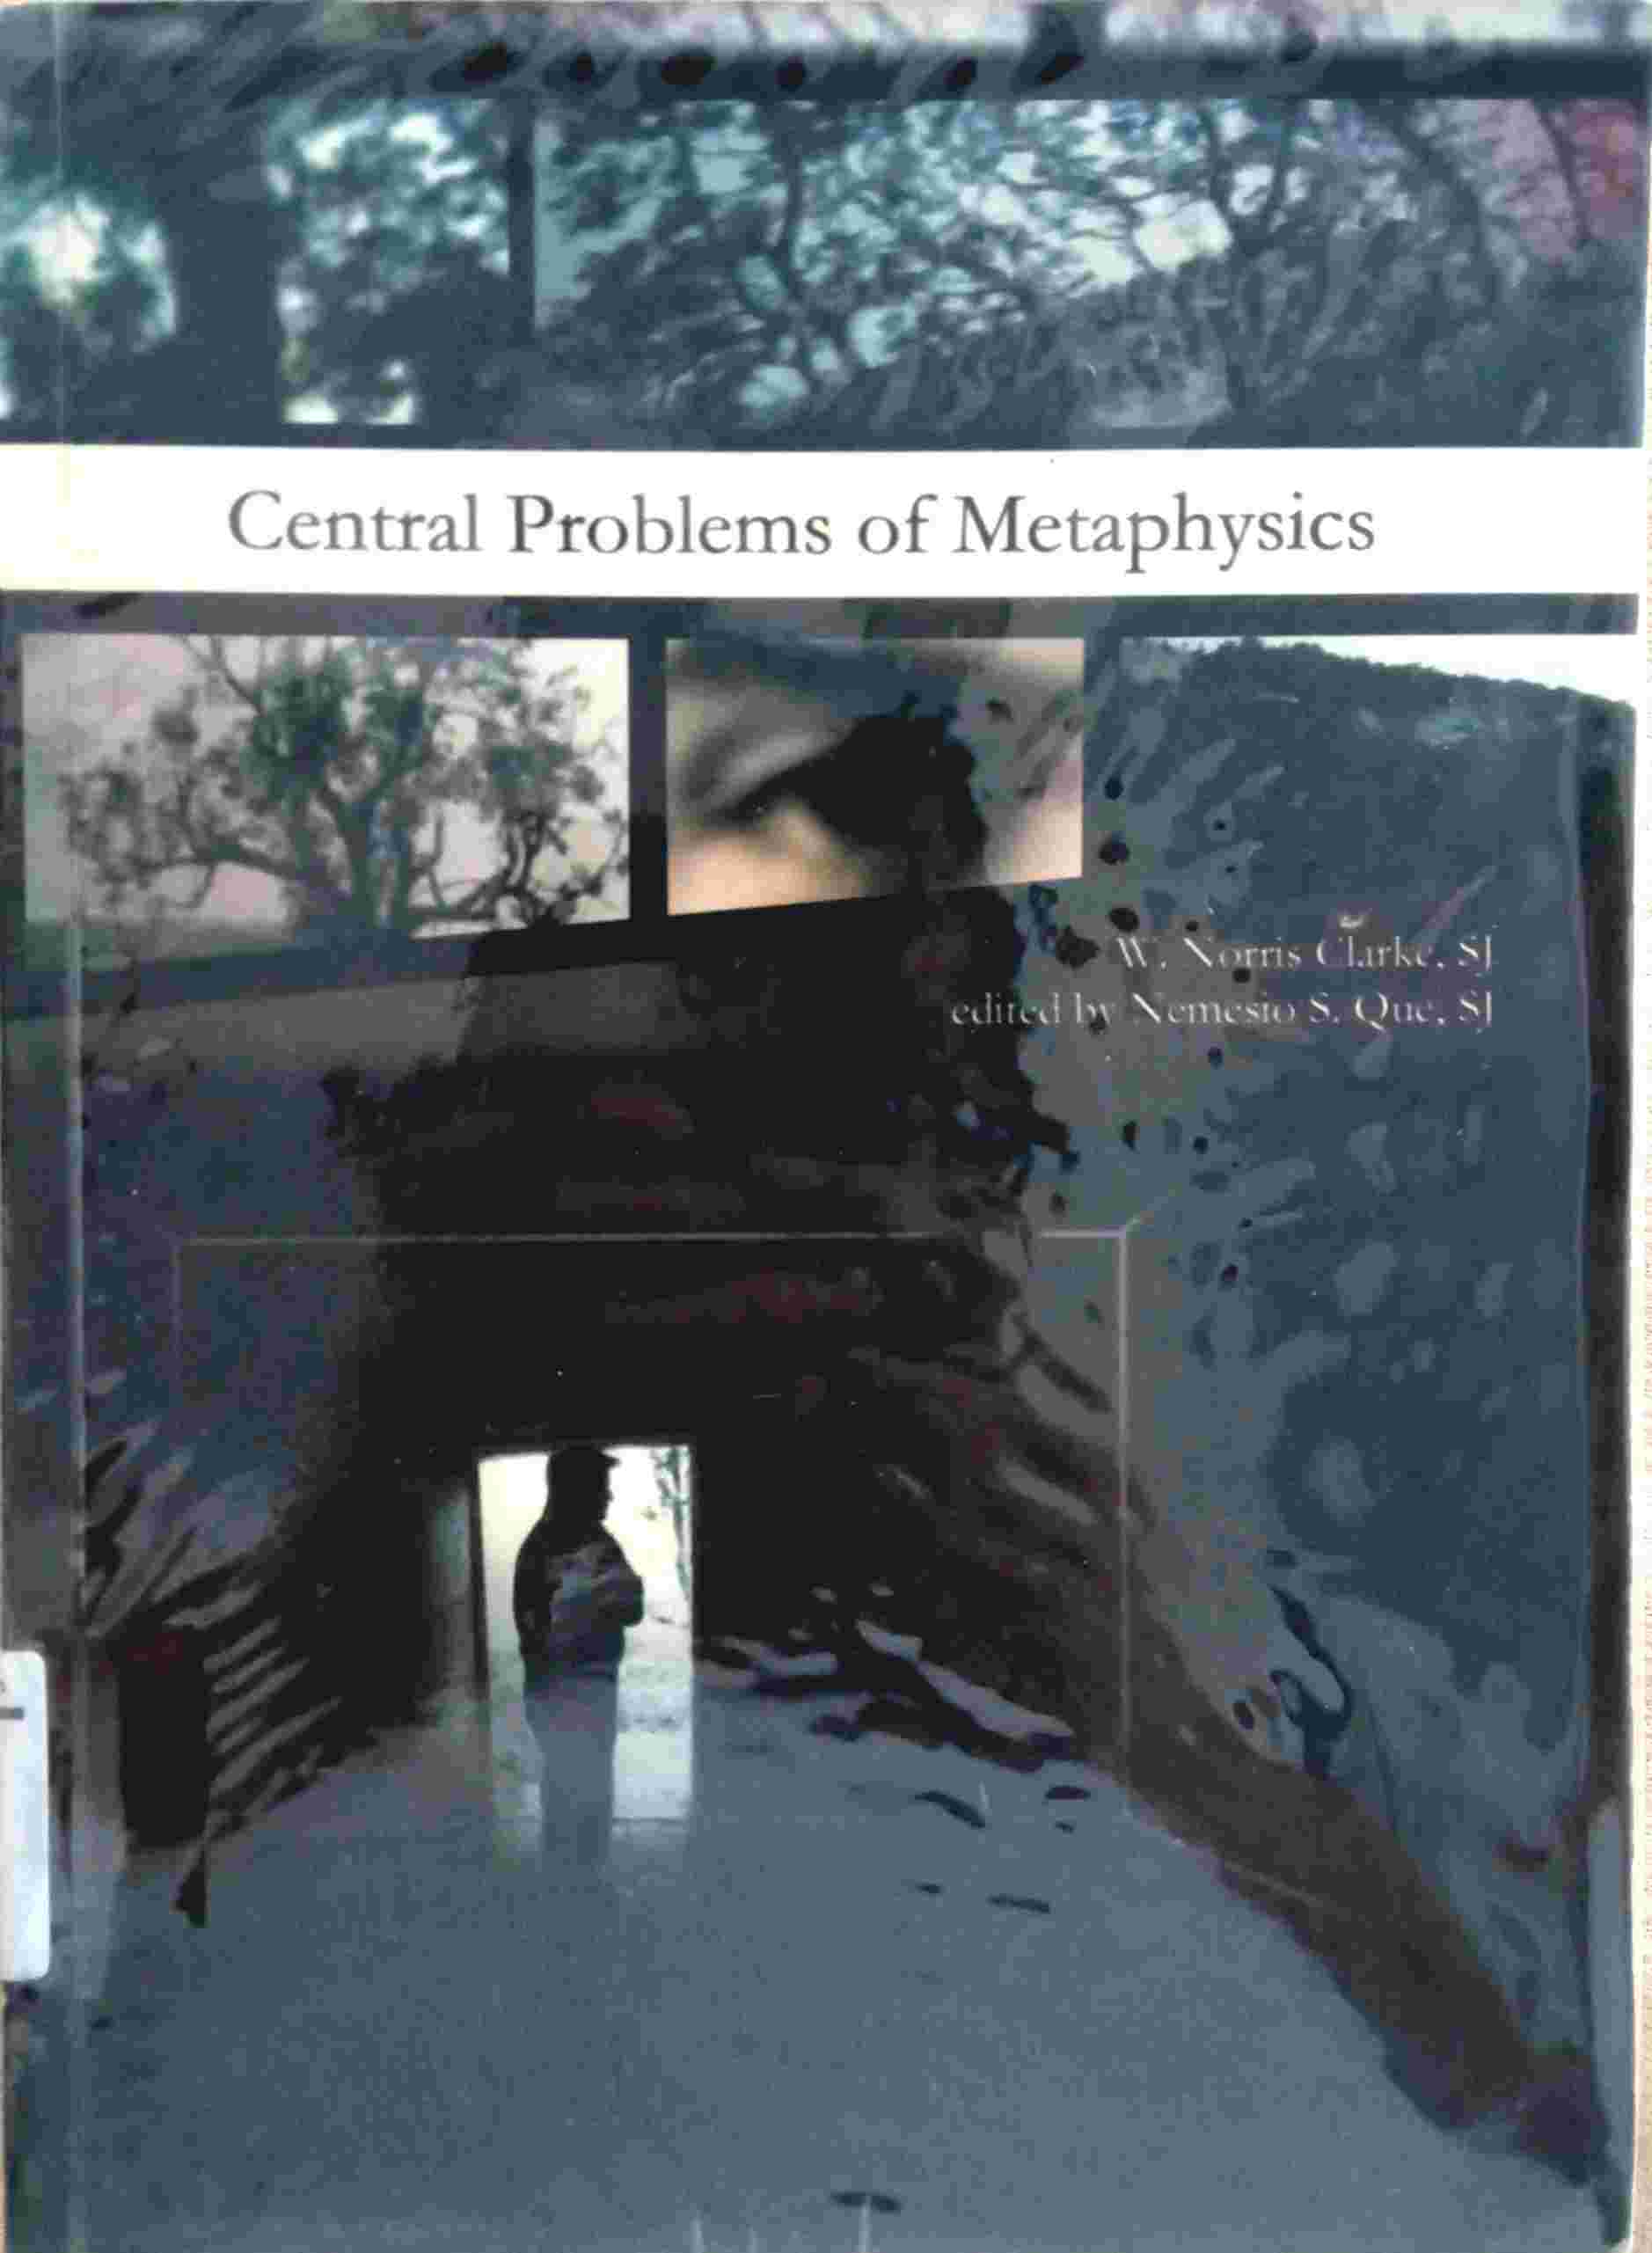 CENTRAL PROBLEMS OF METAPHYSICS